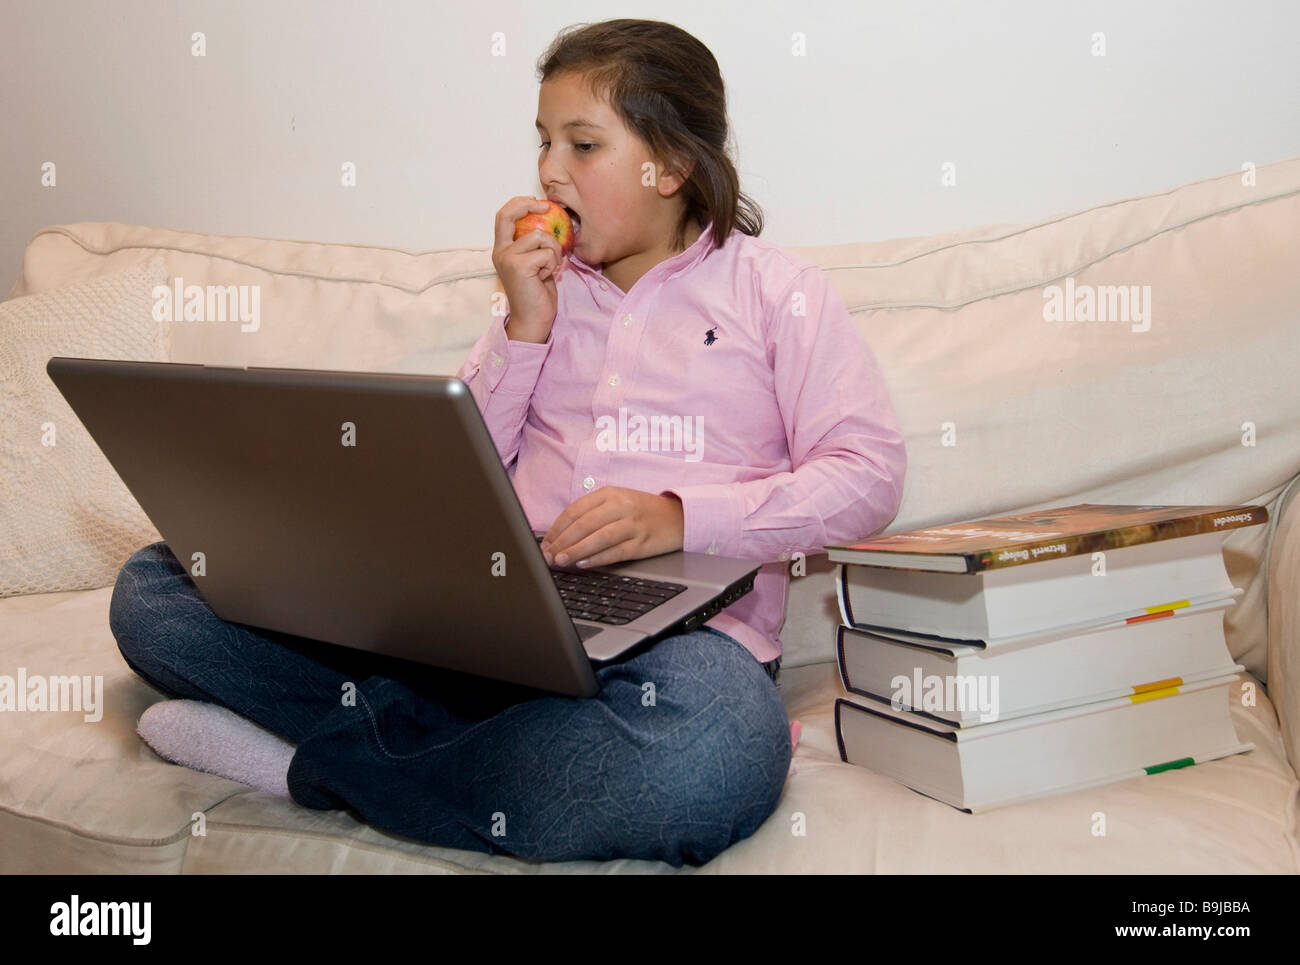 Student, approx. 11 years old, working on a laptop while eating an apple Stock Photo